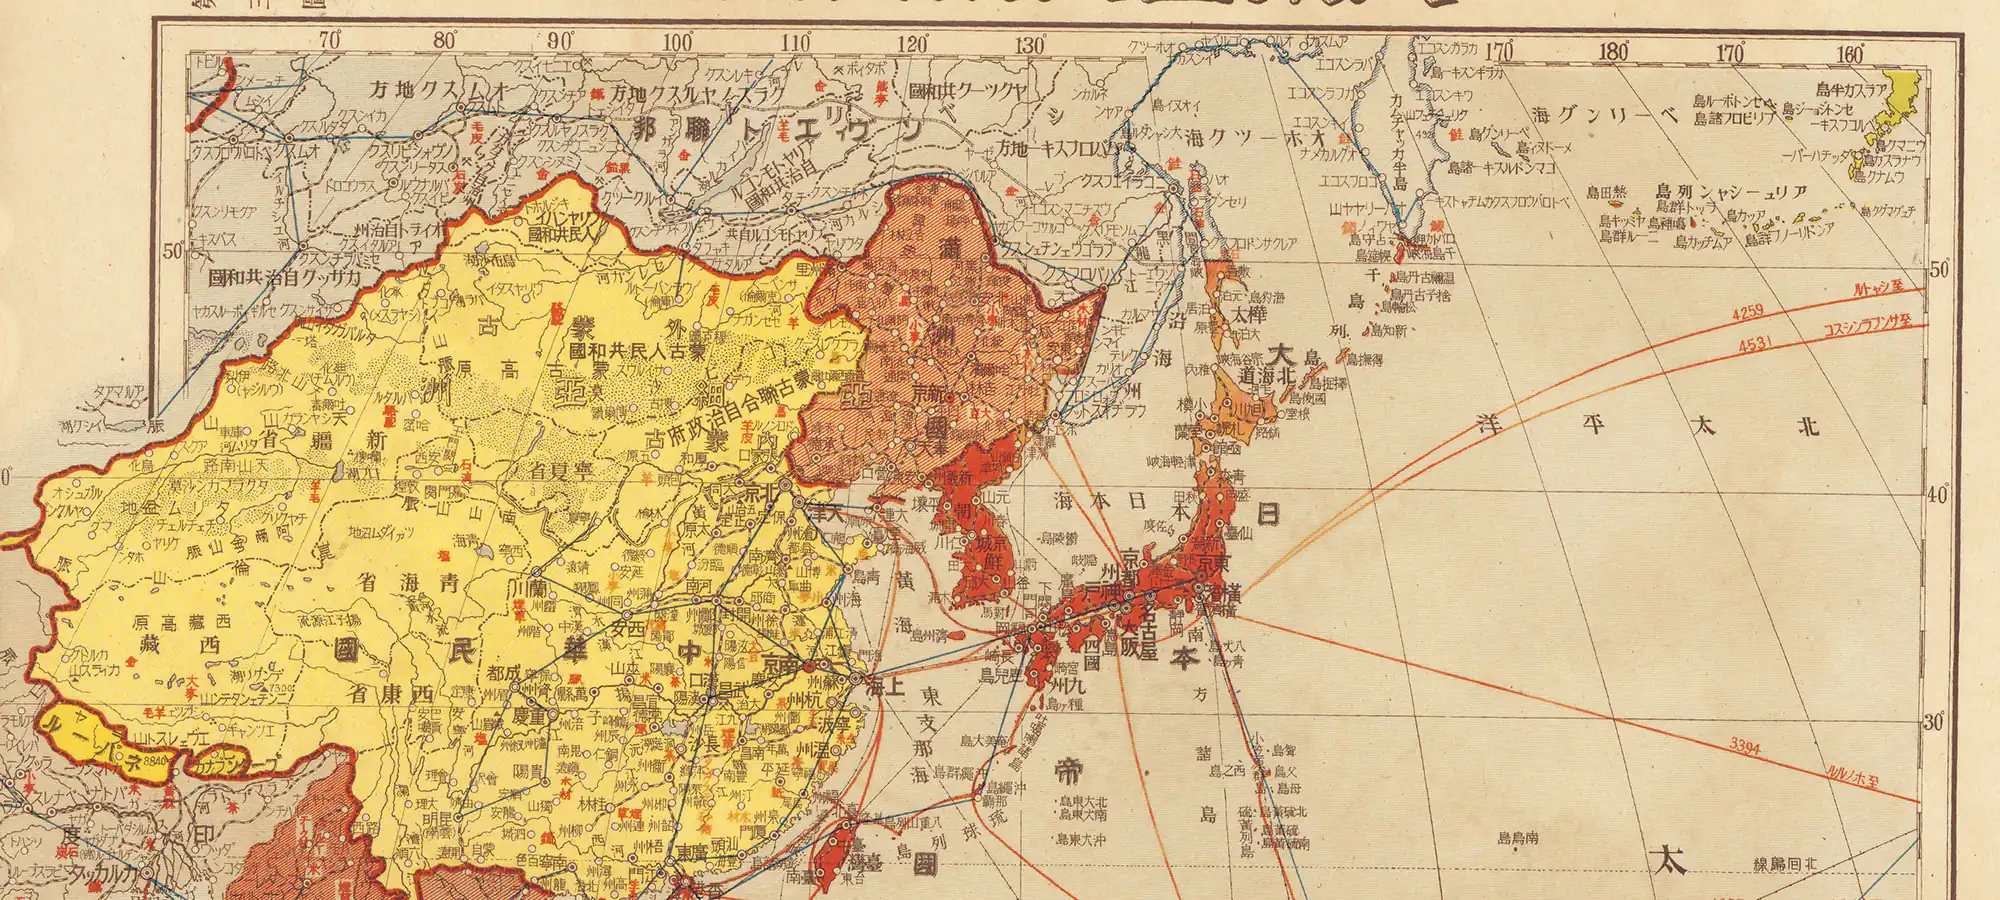 Greater East Asia Co-prosperity Sphere Complete Map - 1943 - Manchurian Imperial Branch Map